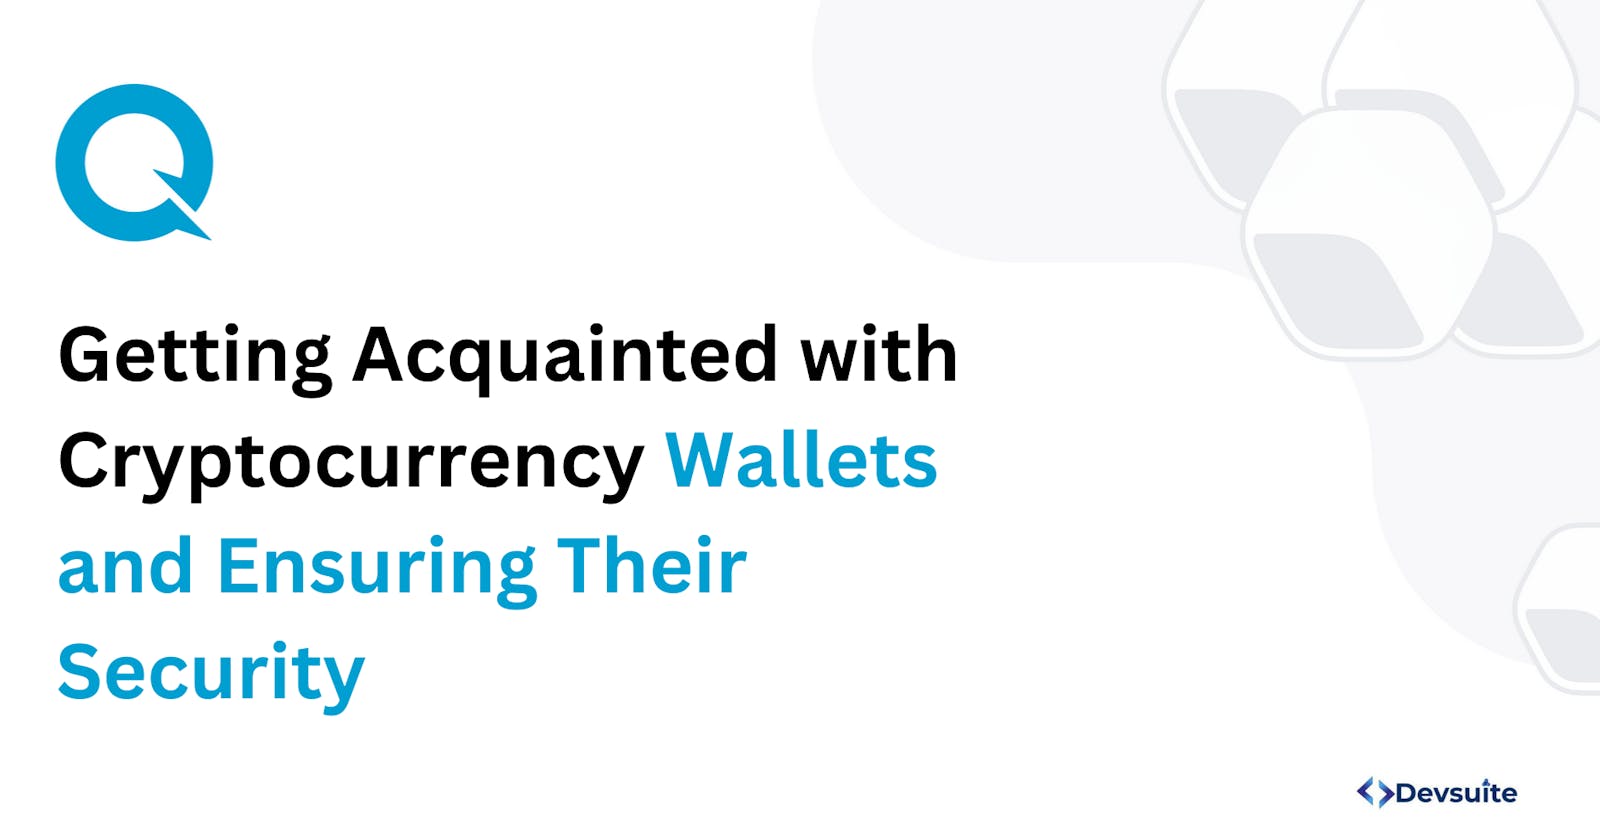 Getting Acquainted with Cryptocurrency Wallets and Ensuring Their Security